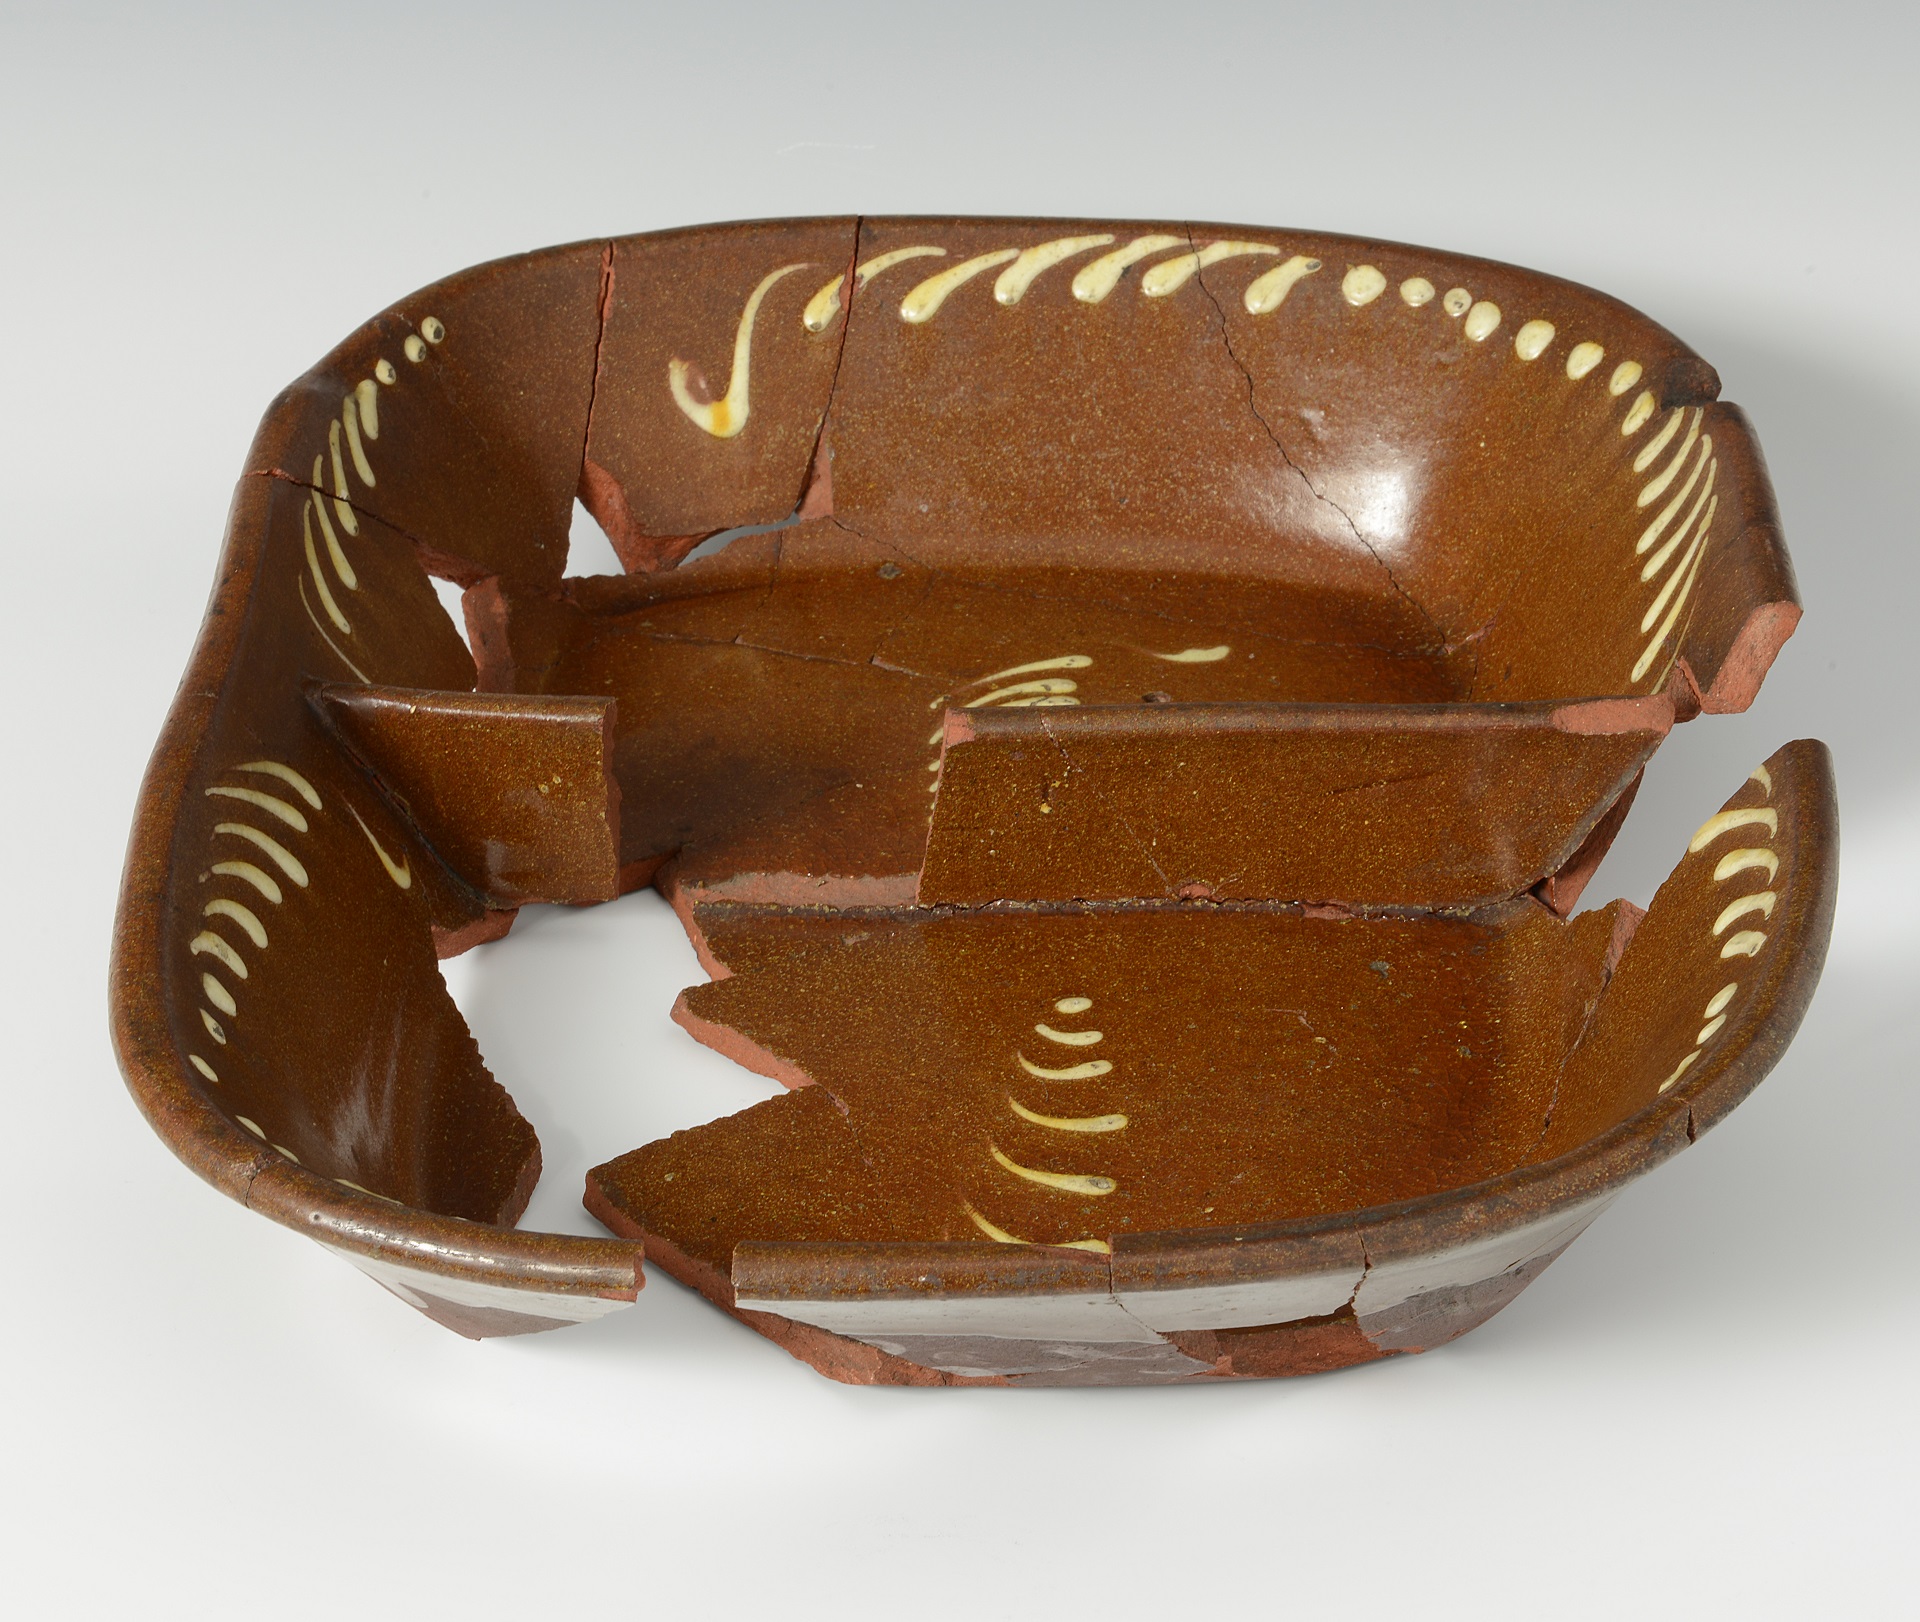 A coloured photograph showing a brown ceramic dish which has been divided into two parts dish which has been reconstructed, there is also yellow decoration along the edge.